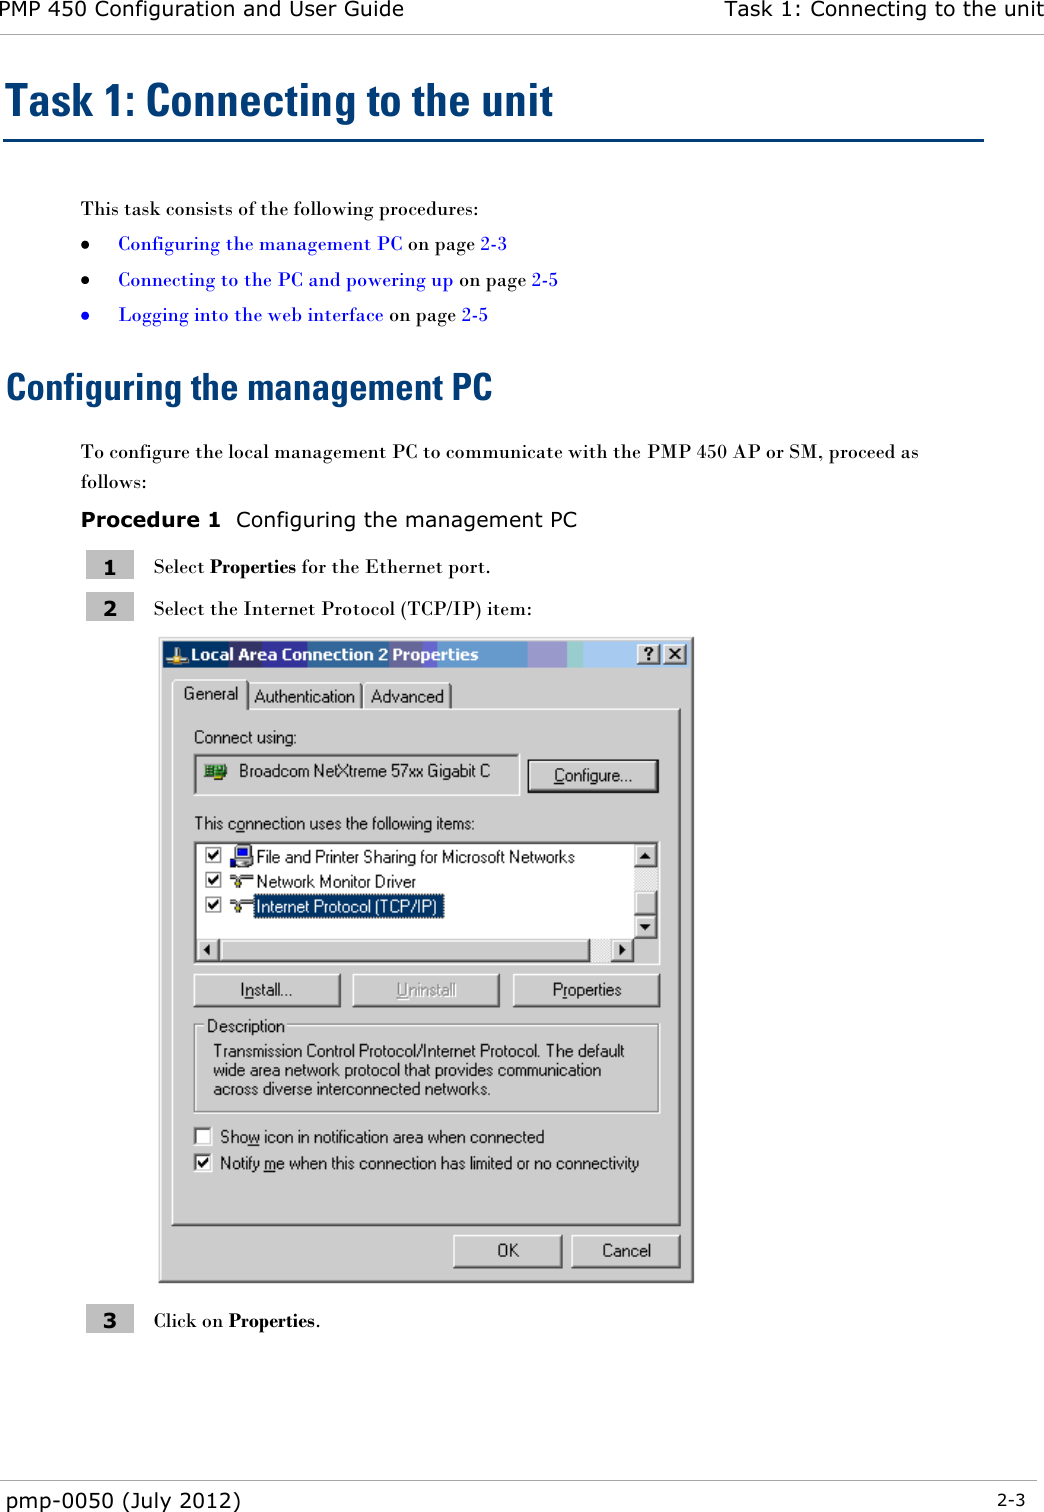 PMP 450 Configuration and User Guide Task 1: Connecting to the unit  pmp-0050 (July 2012)  2-3  Task 1: Connecting to the unit This task consists of the following procedures:  Configuring the management PC on page 2-3  Connecting to the PC and powering up on page 2-5  Logging into the web interface on page 2-5 Configuring the management PC To configure the local management PC to communicate with the PMP 450 AP or SM, proceed as follows: Procedure 1  Configuring the management PC 1 Select Properties for the Ethernet port. 2 Select the Internet Protocol (TCP/IP) item:  3 Click on Properties. 